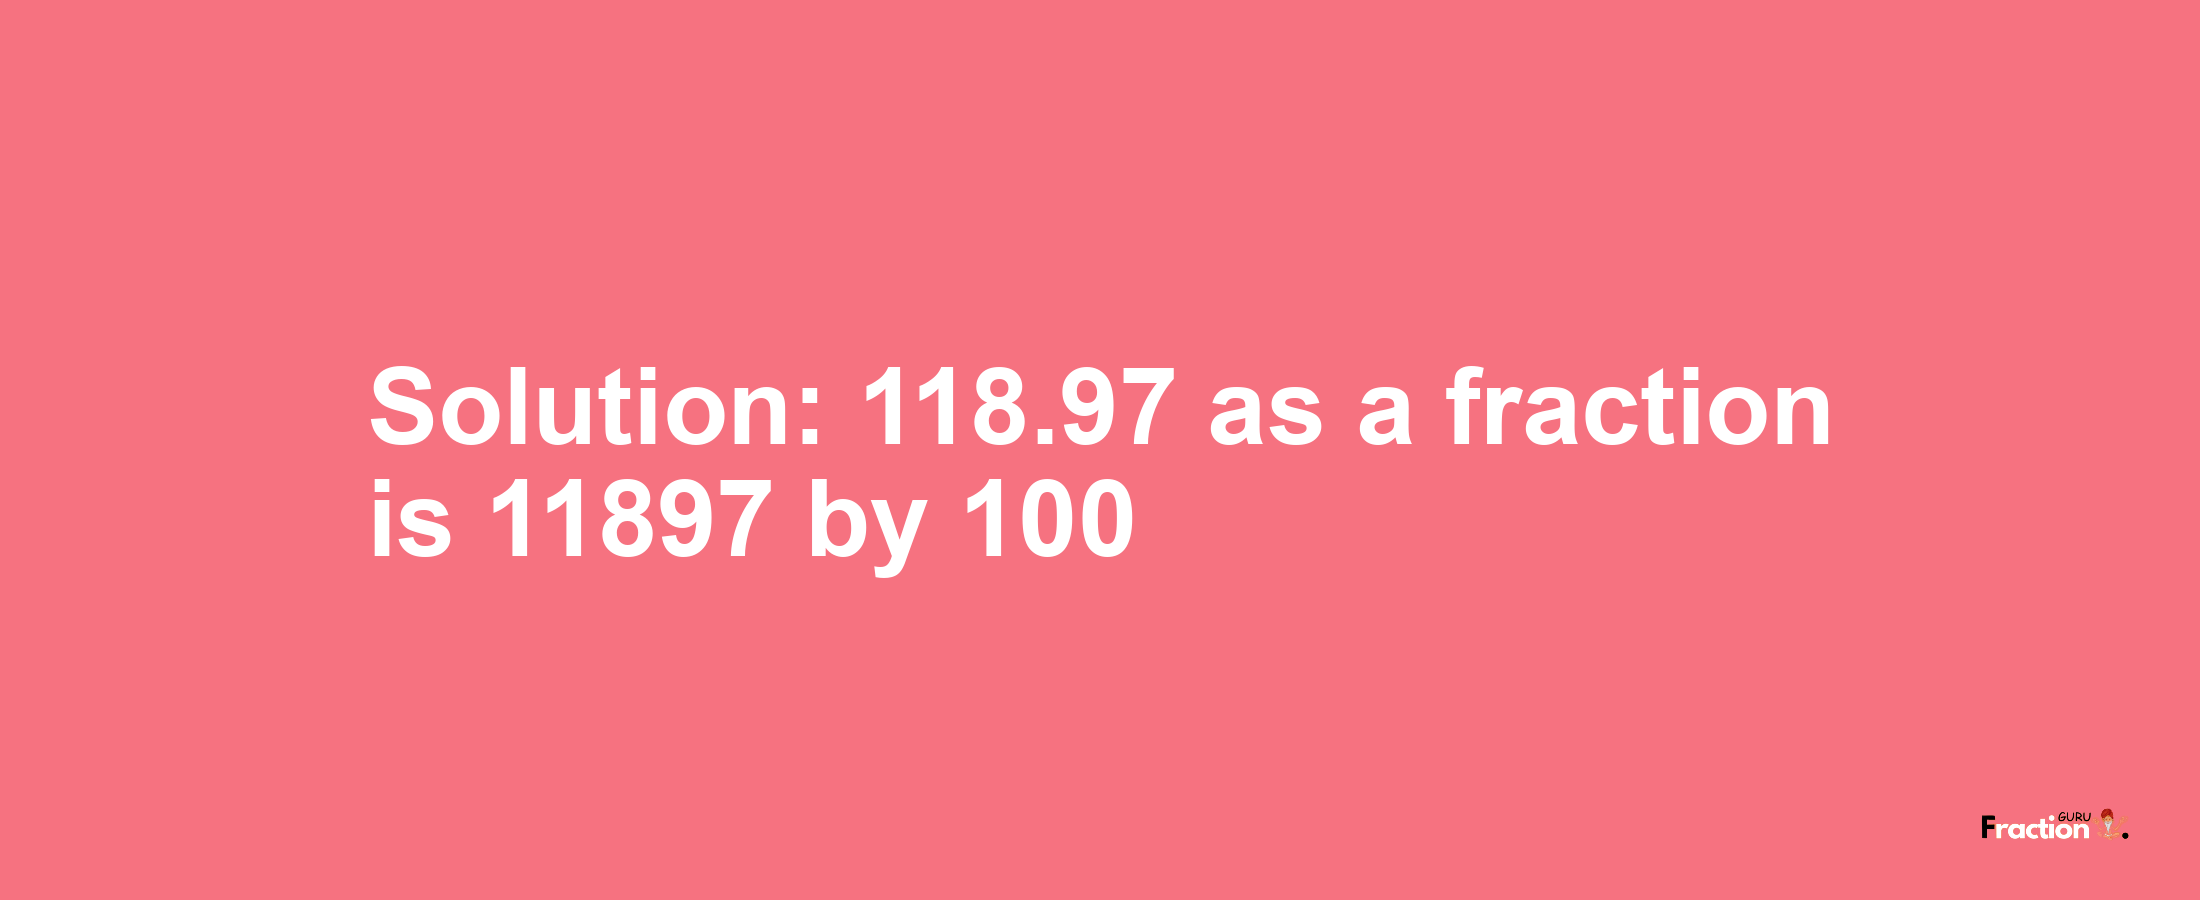 Solution:118.97 as a fraction is 11897/100